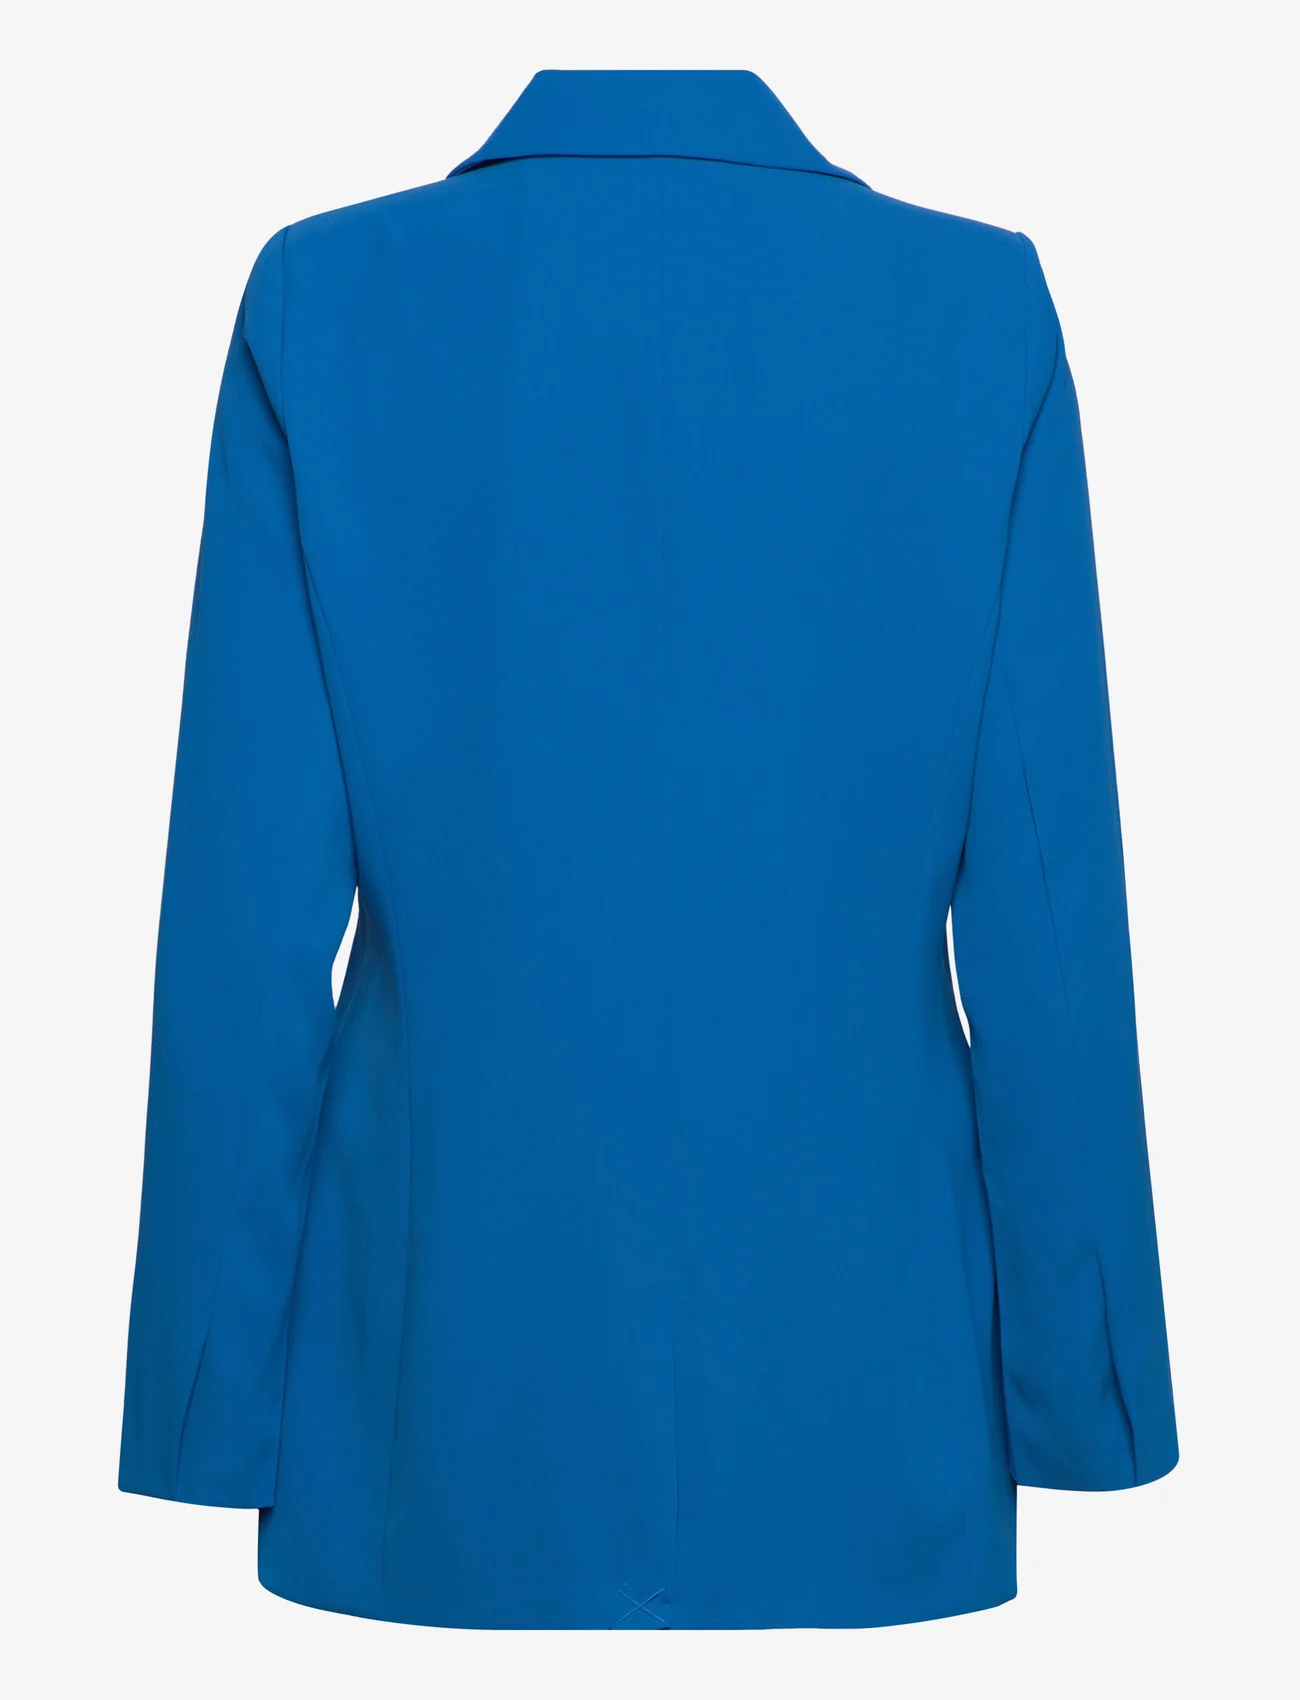 Minus - Veila Blazer - party wear at outlet prices - ocean blue - 1